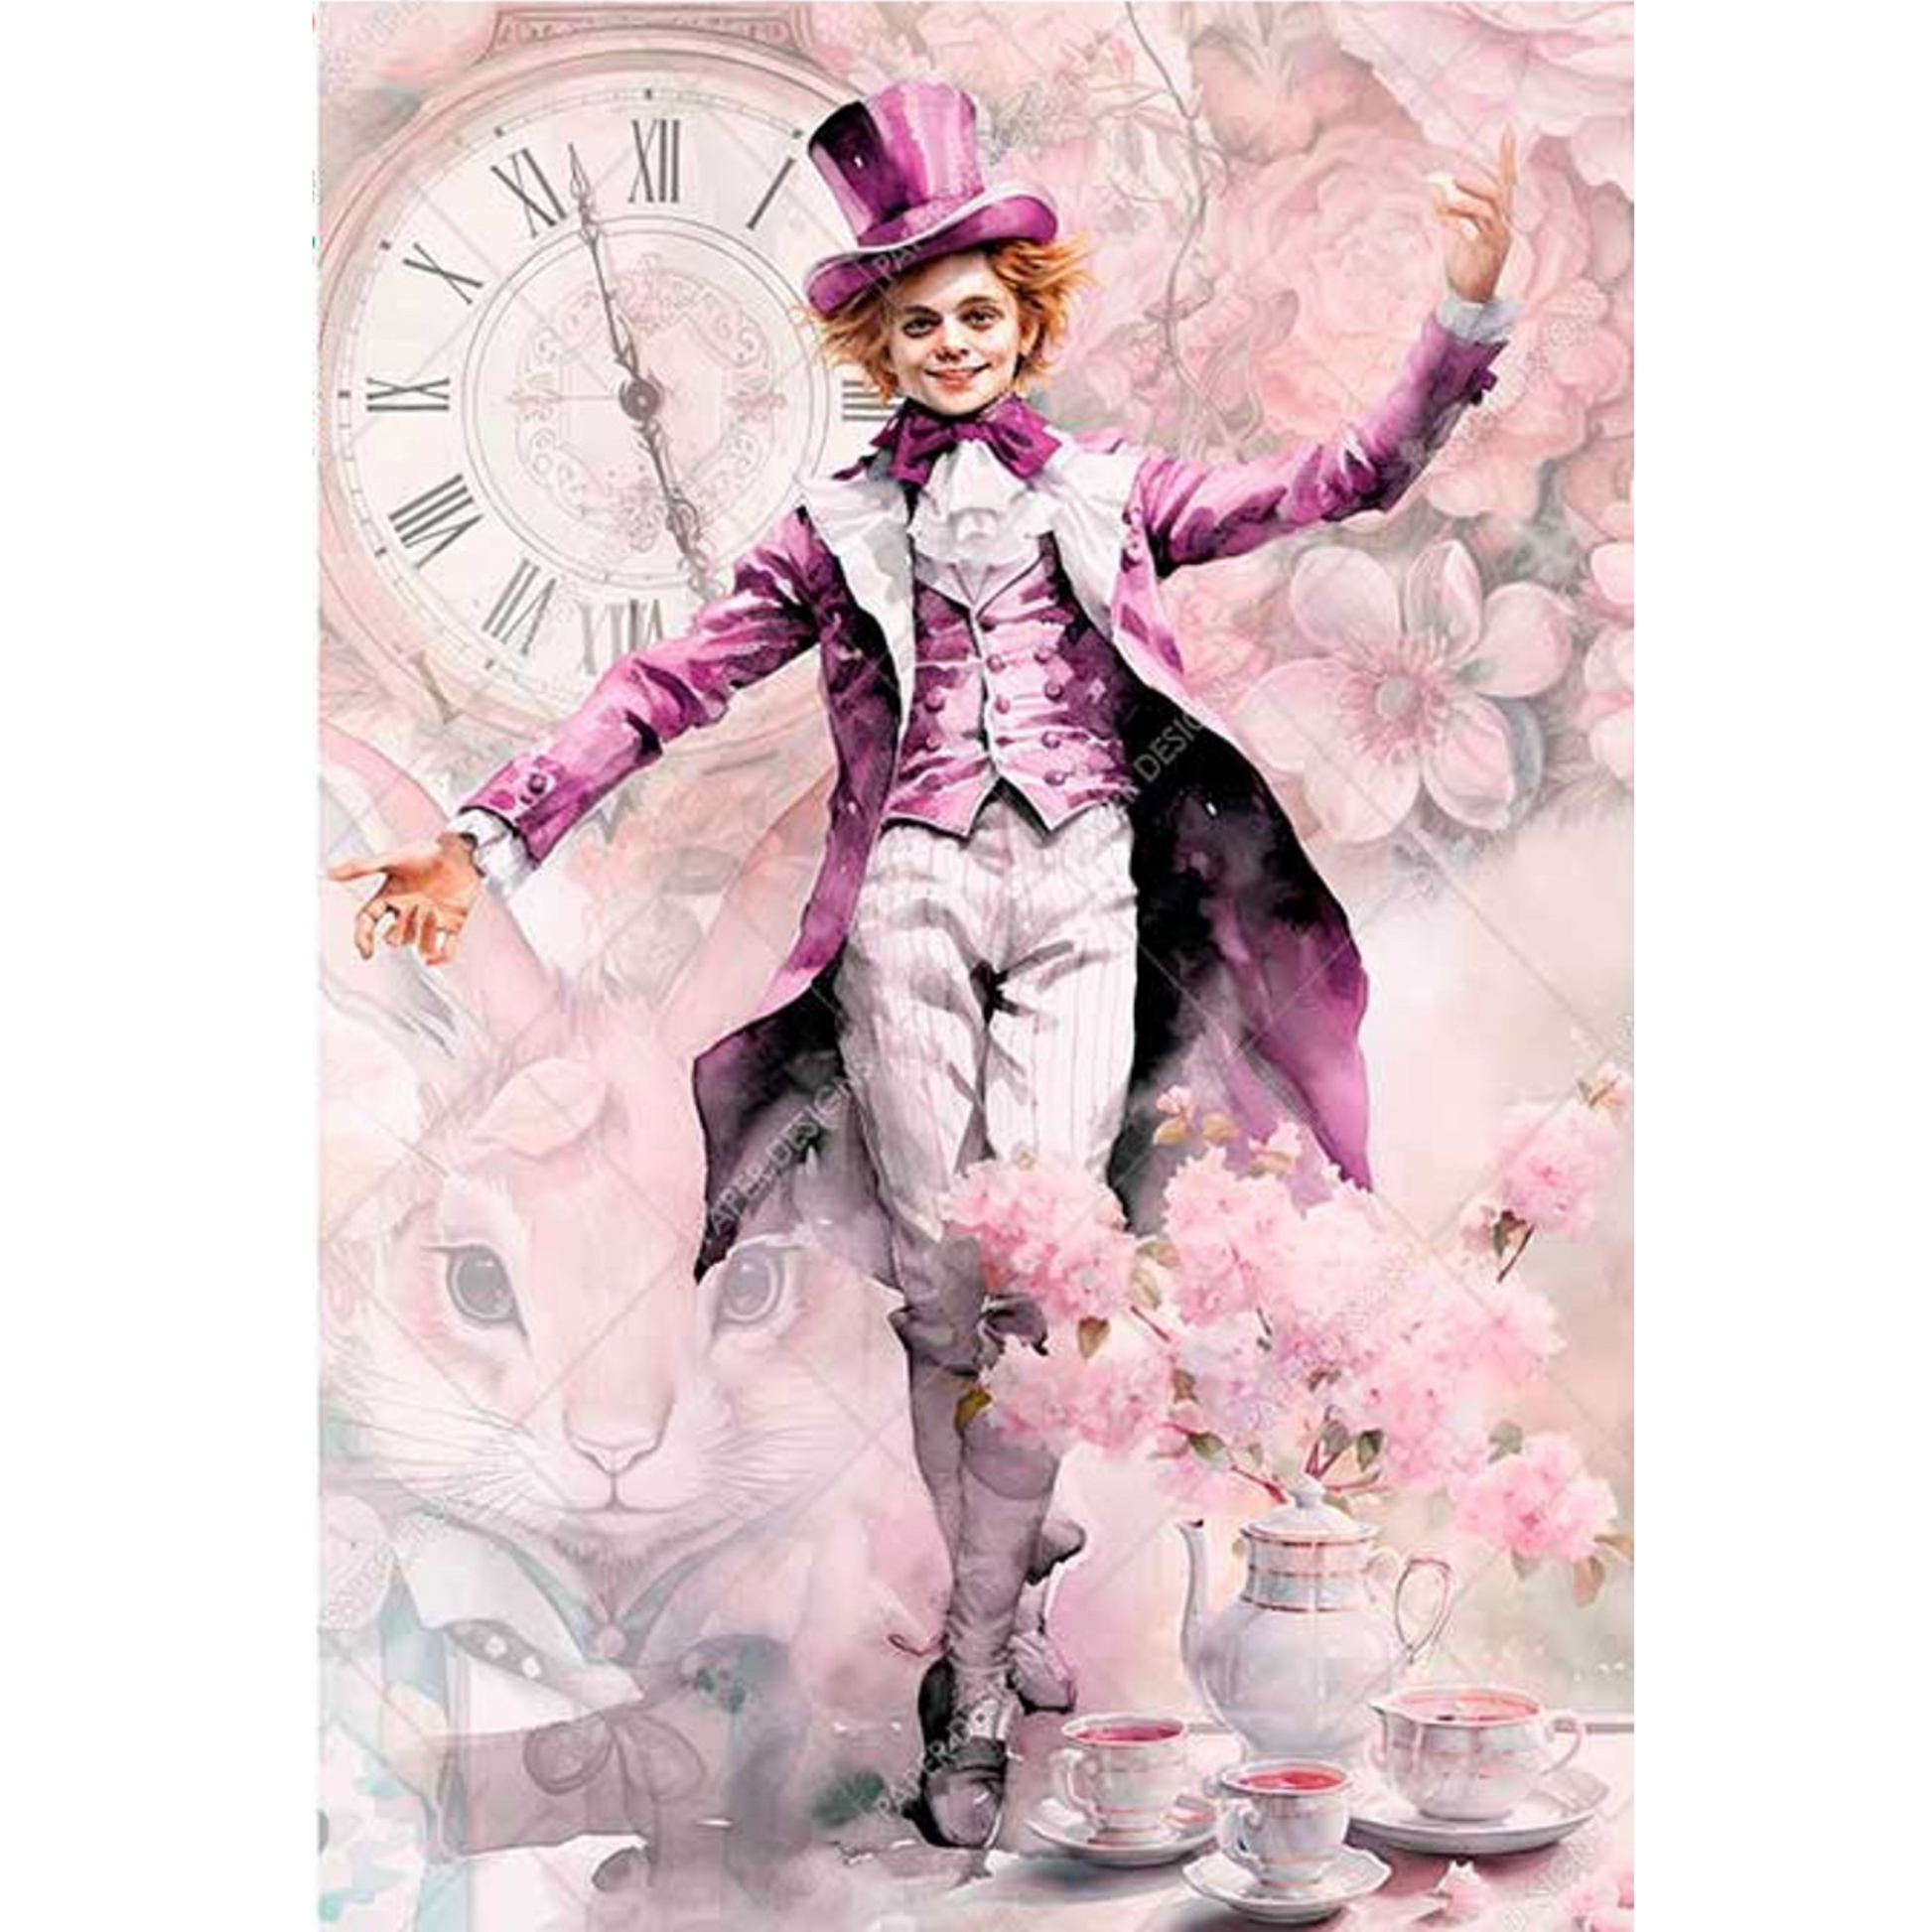 "Purple Mad Hatter" decoupage rice paper by Paper Designs. Available at Milton's Daughter.